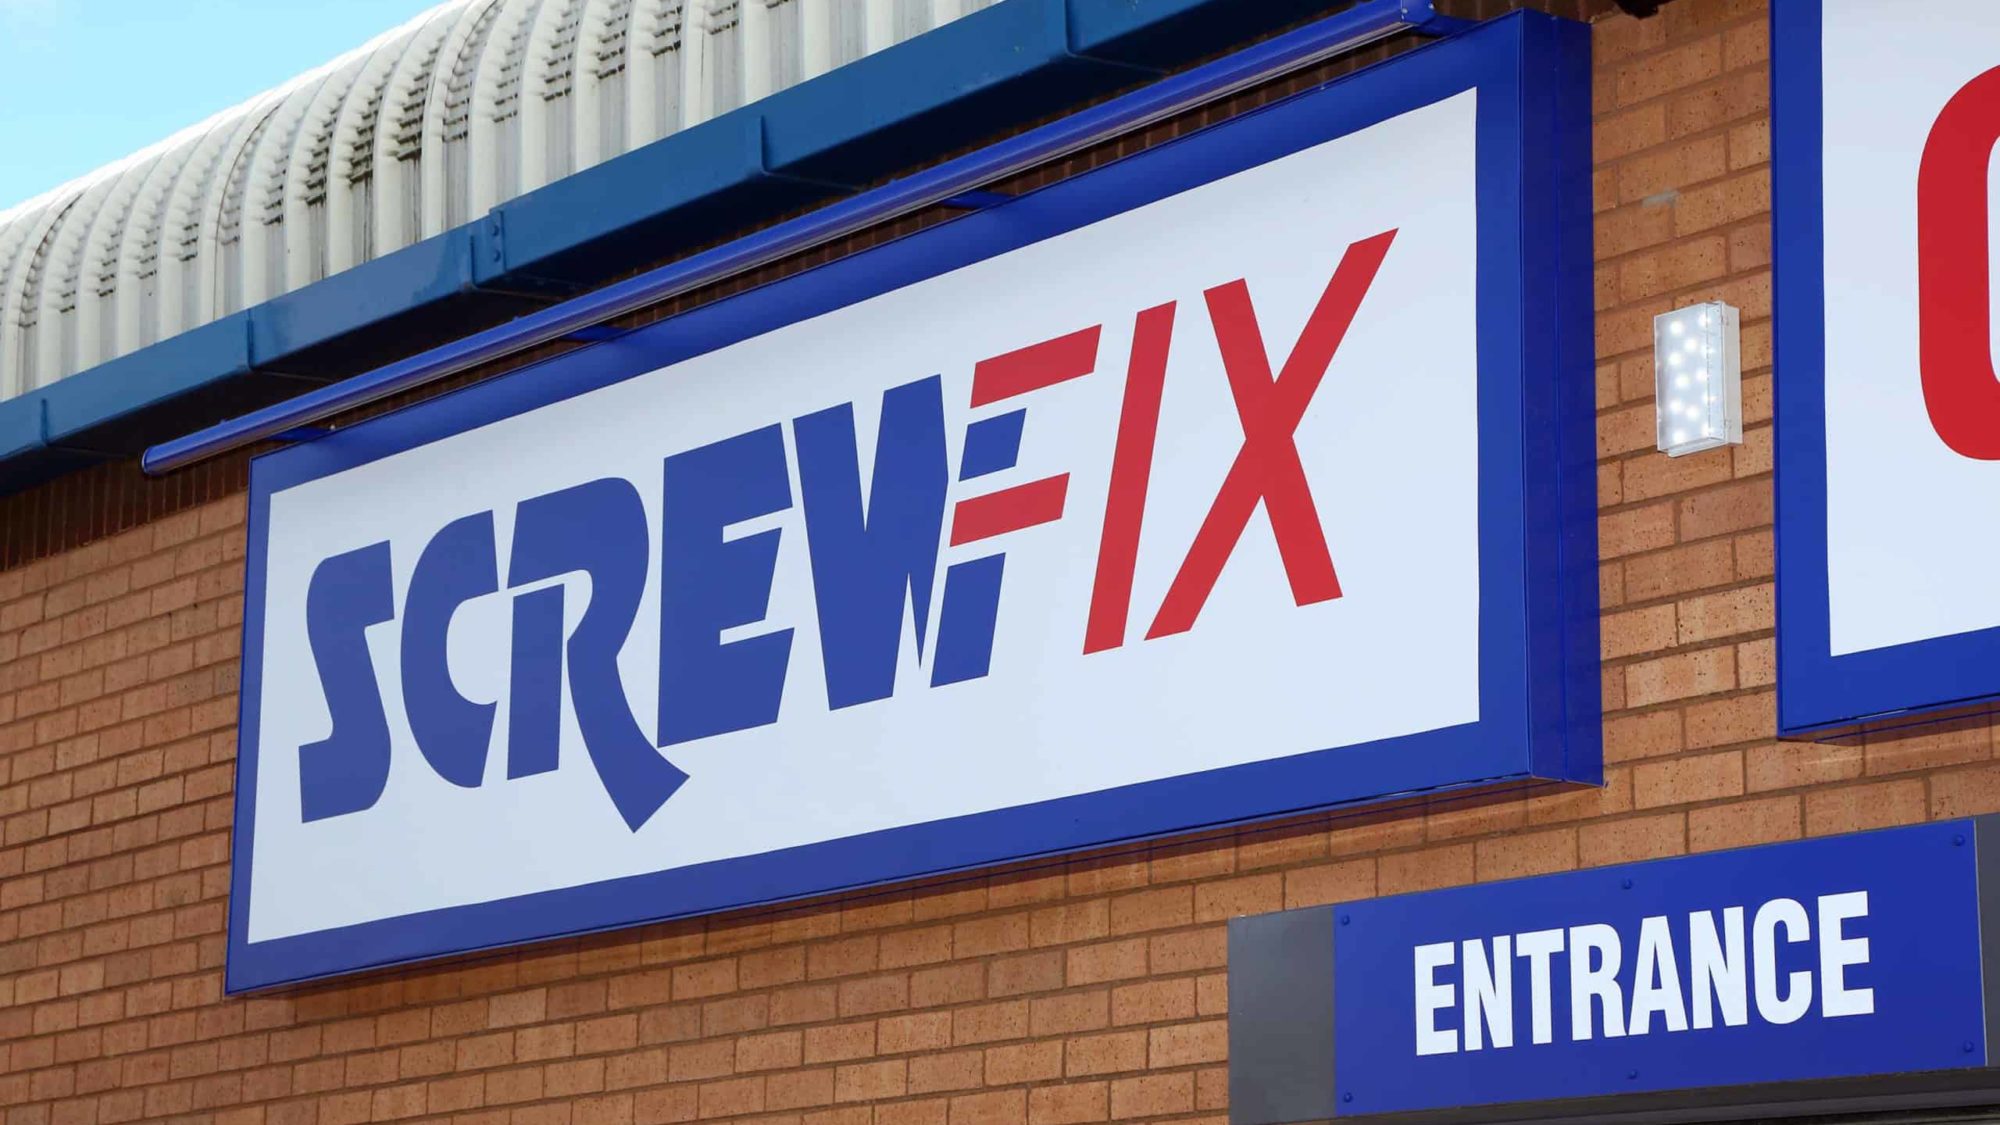 Screwfix bolsters Kingfisher half year results